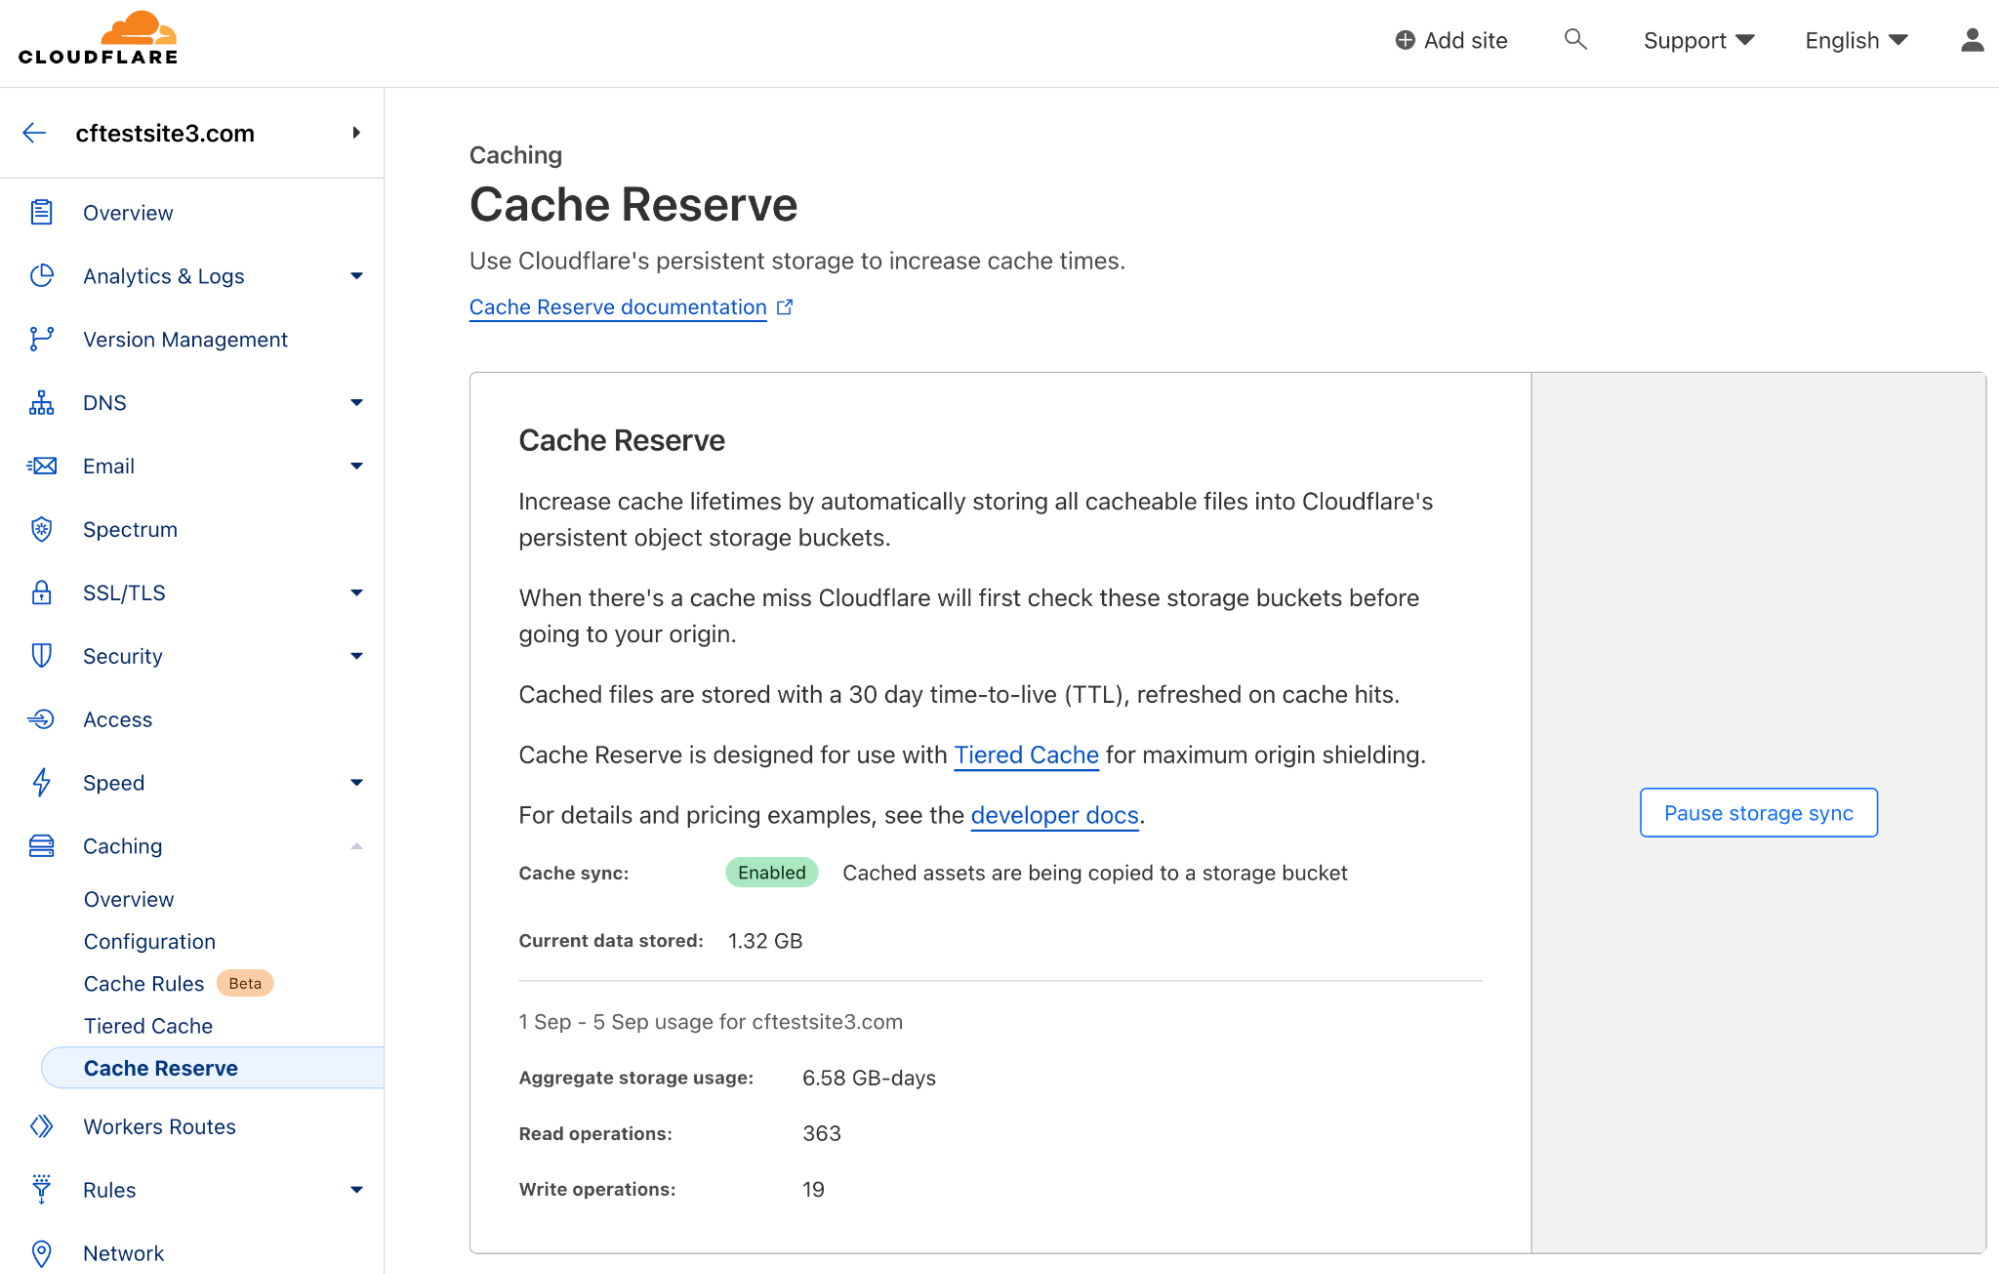 Cloudflare provides one-click enablement of Cache Reserve which provides persistent object storage for CDN to cut down on egress fees charged by many cloud providers.